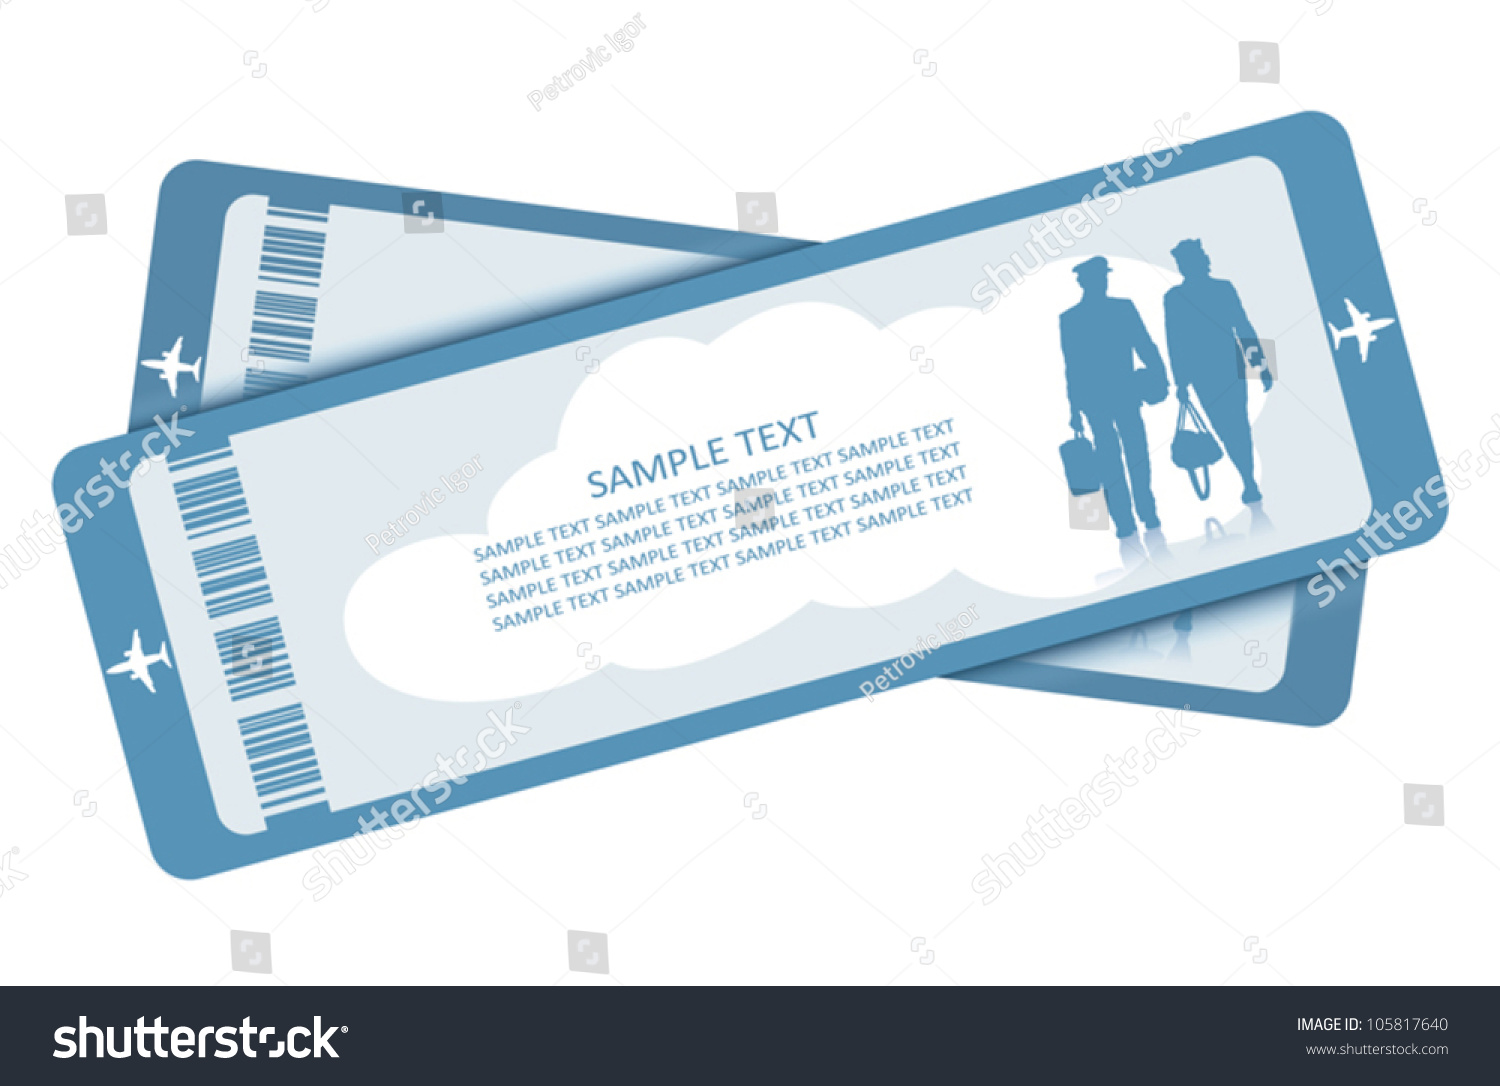 clipart airplane ticket - photo #26